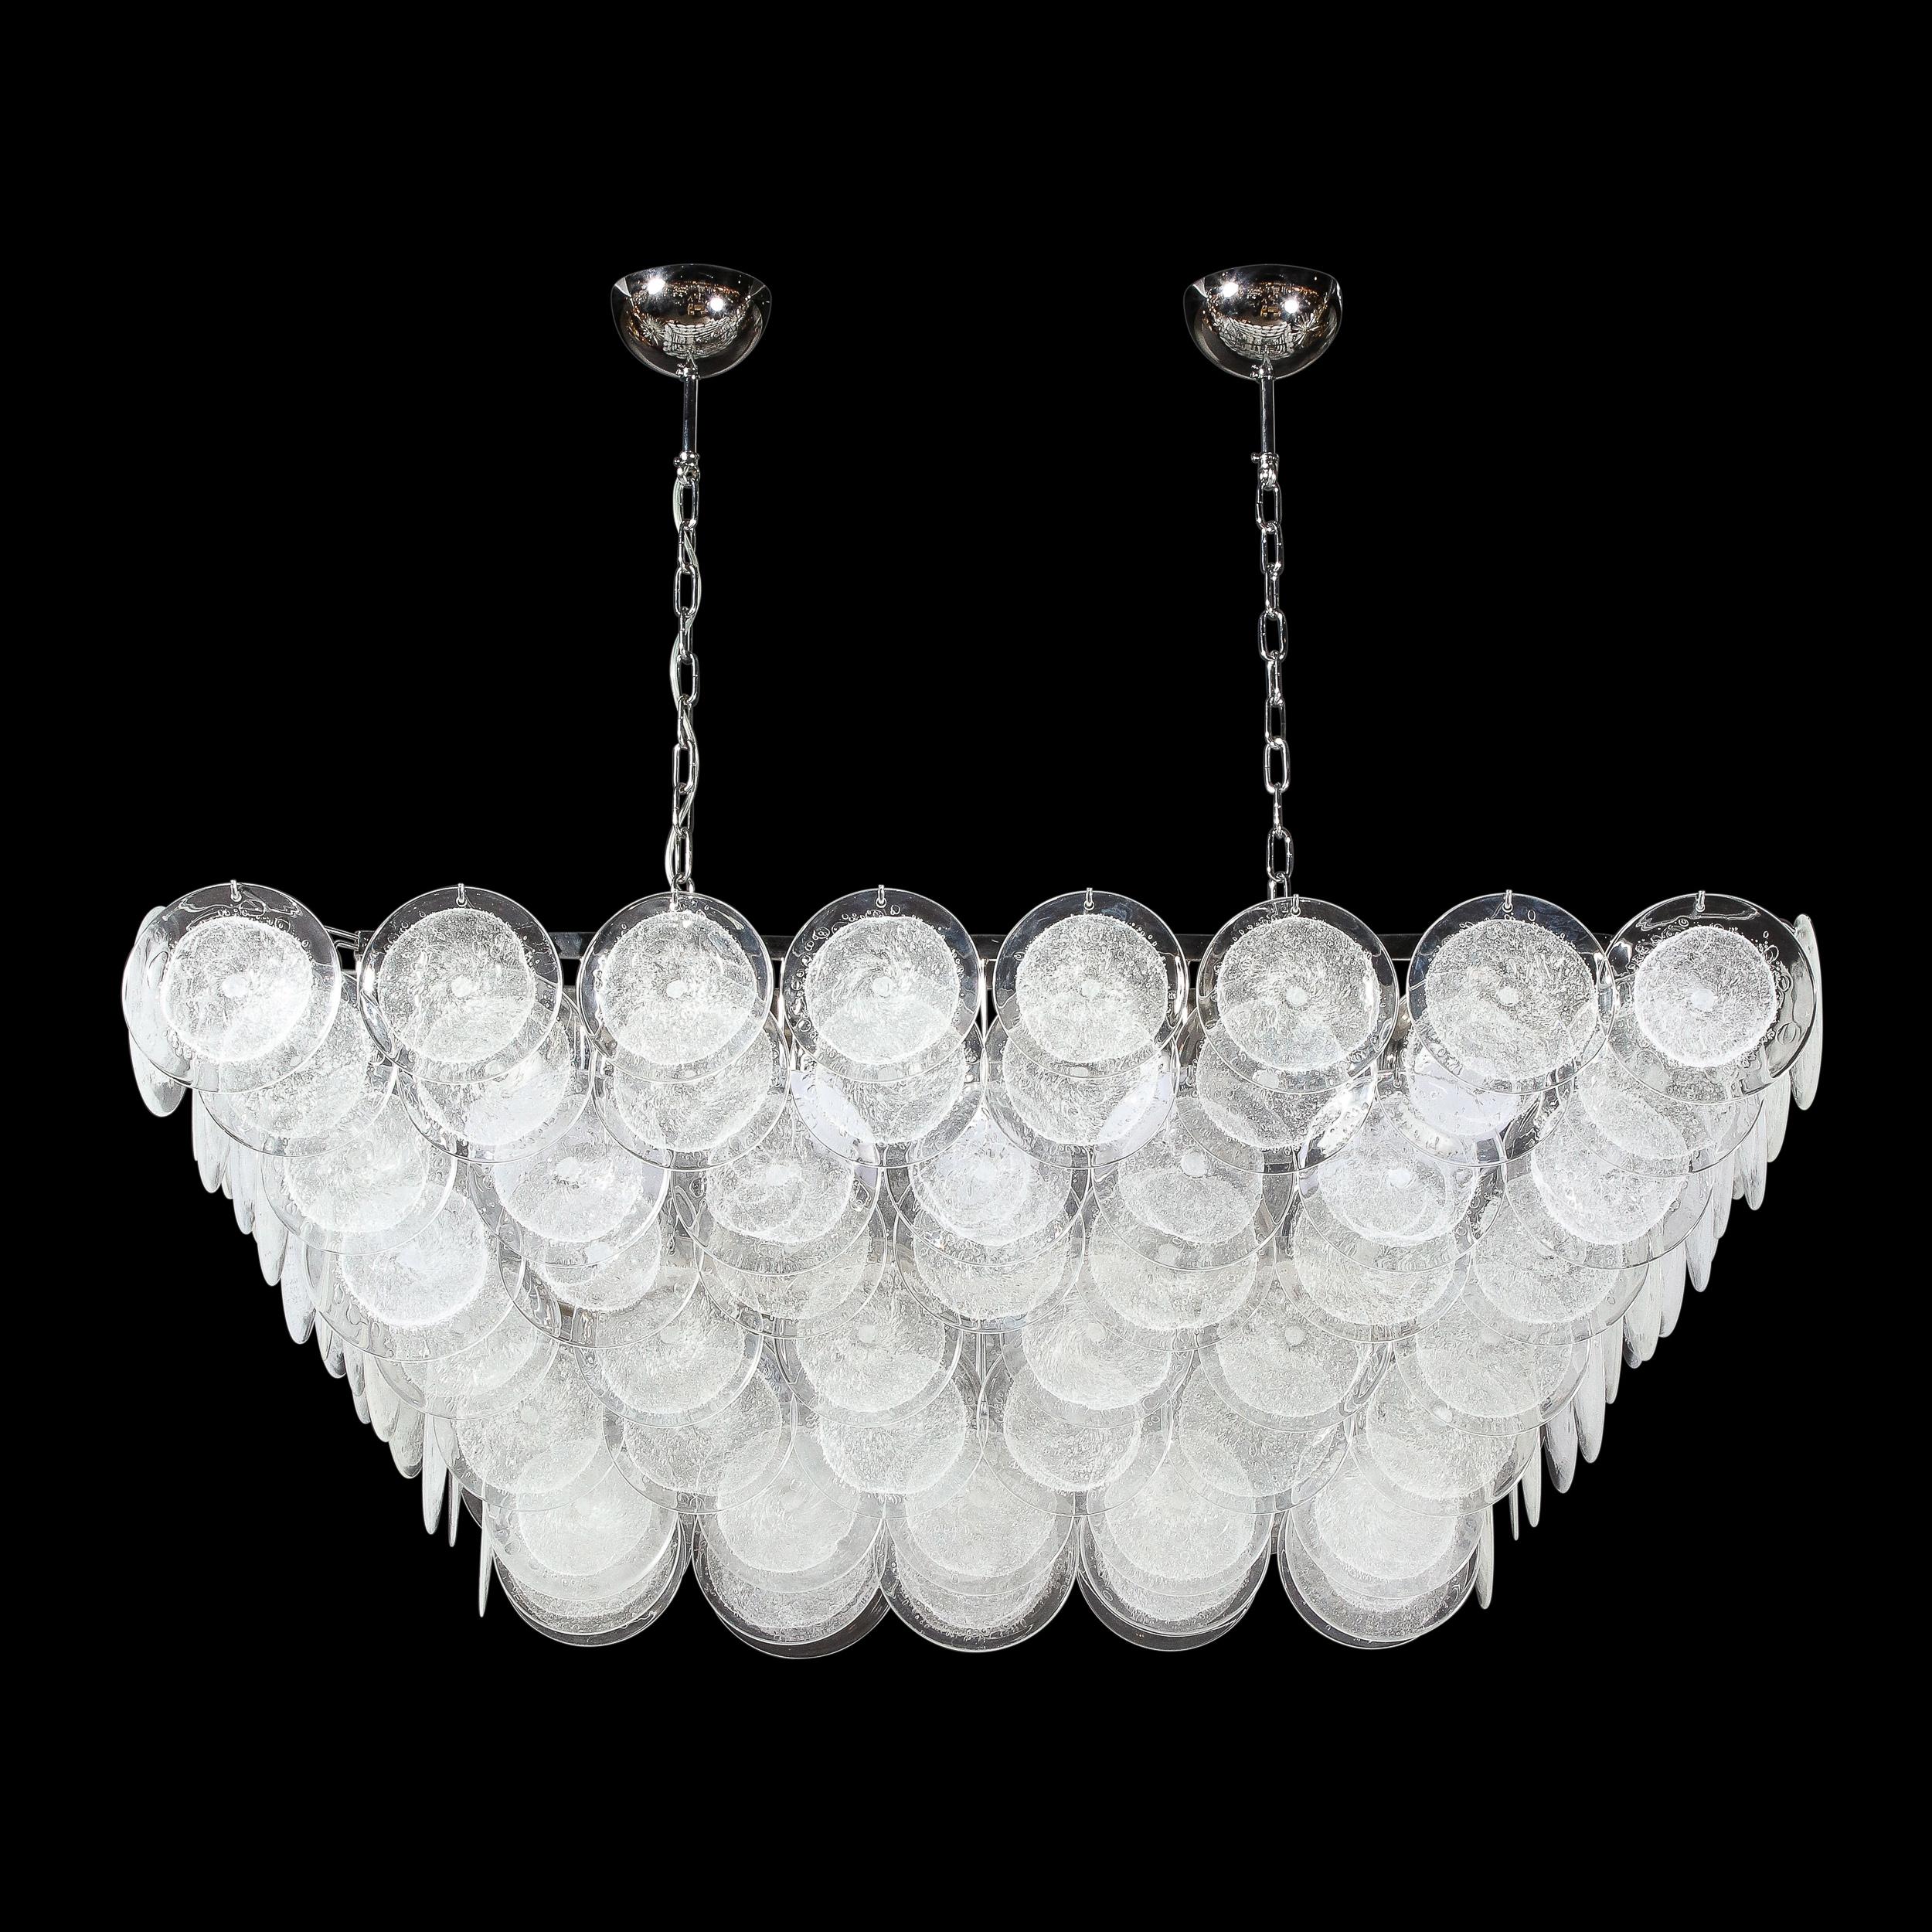 This stunning modernist elongated chandelier was handblown in Murano, Italy- the island off the coast of Venice renowned for centuries for its superlative glass production. It offers an inverse volumetric trapezoidal form from which an abundance of